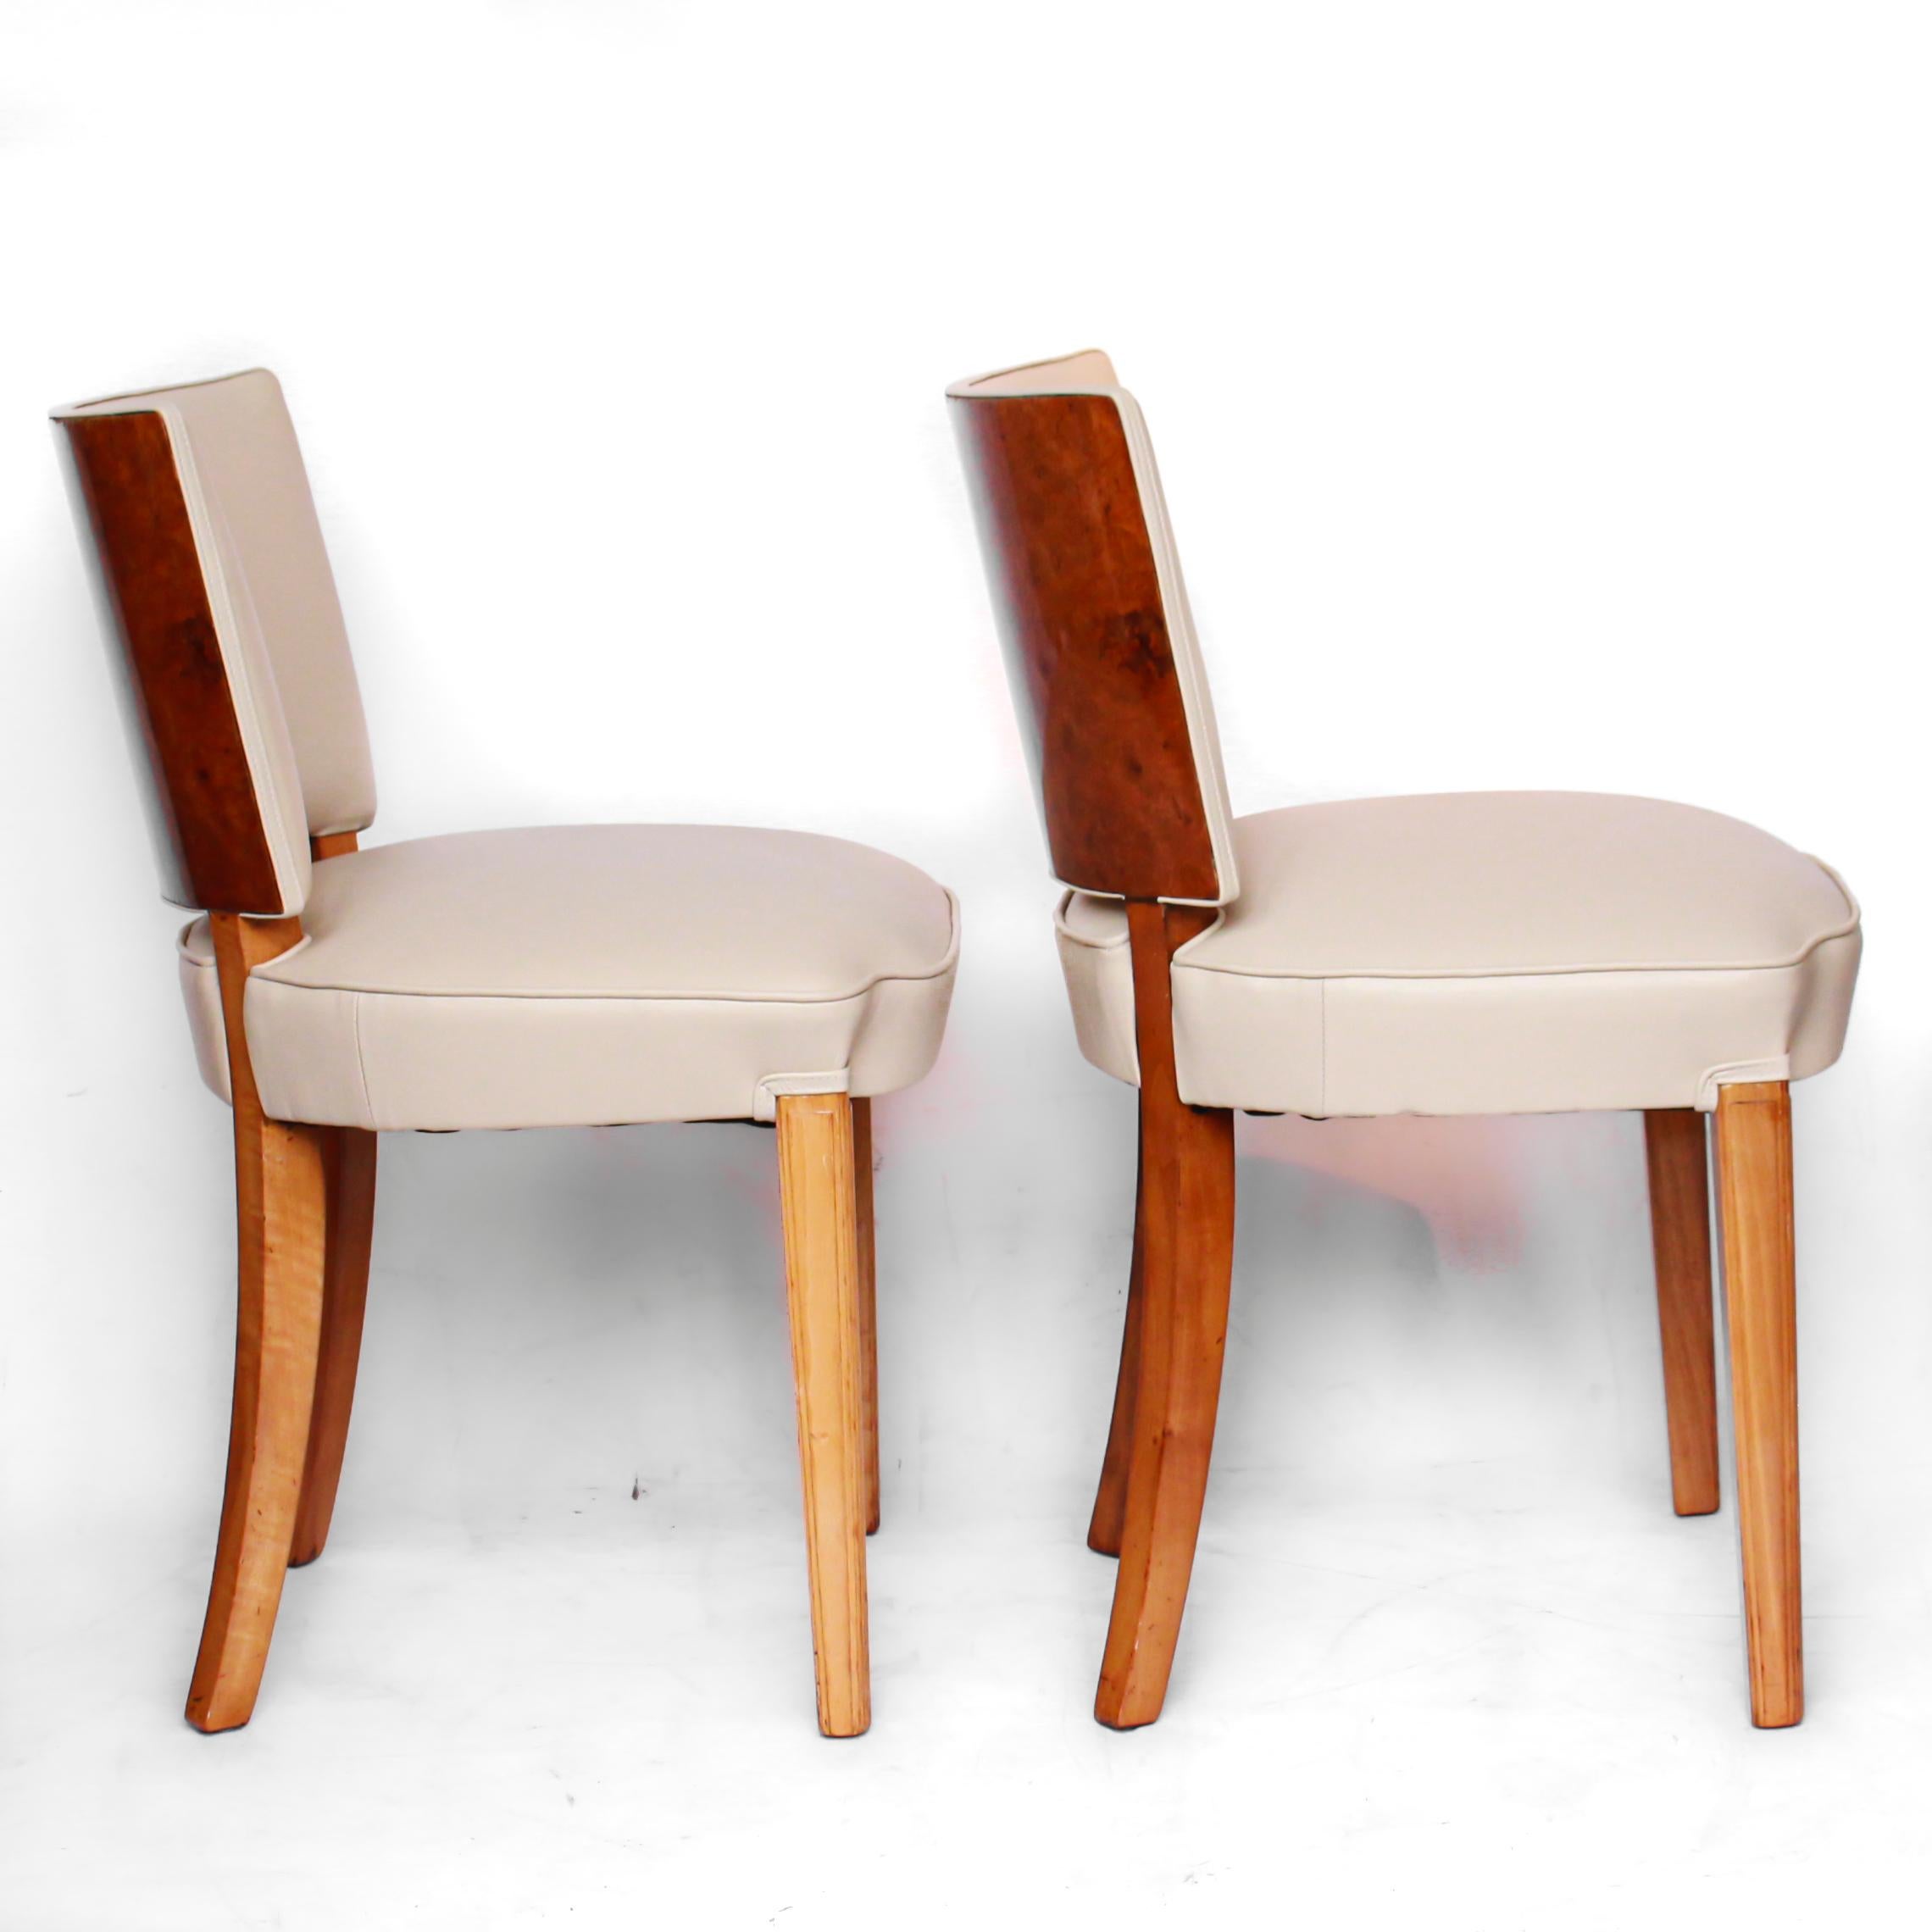 English A Pair of Art Deco Side Chairs Solid and Veneered Walnut Cream Leather 1930's